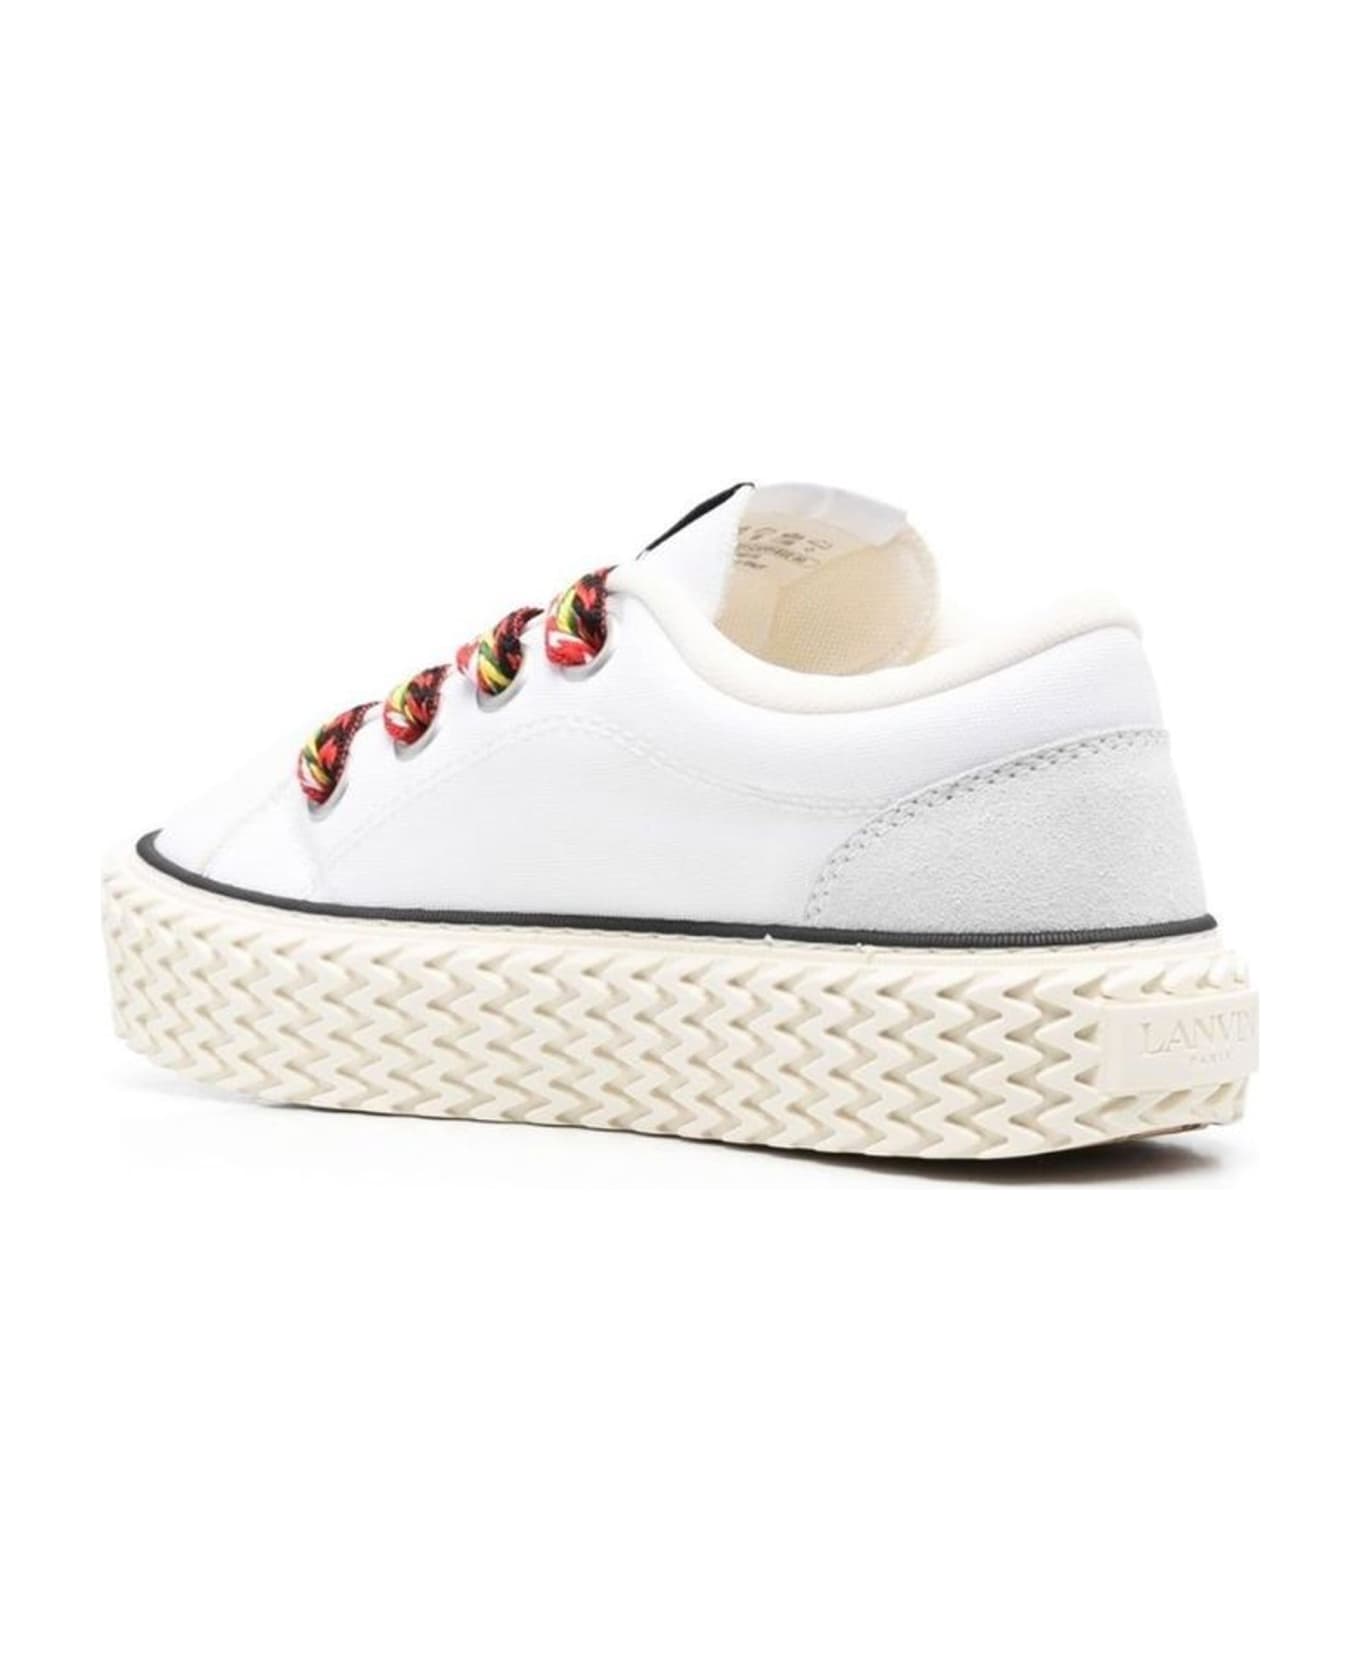 Lanvin Cotton Lace-up Sneakers - White スニーカー